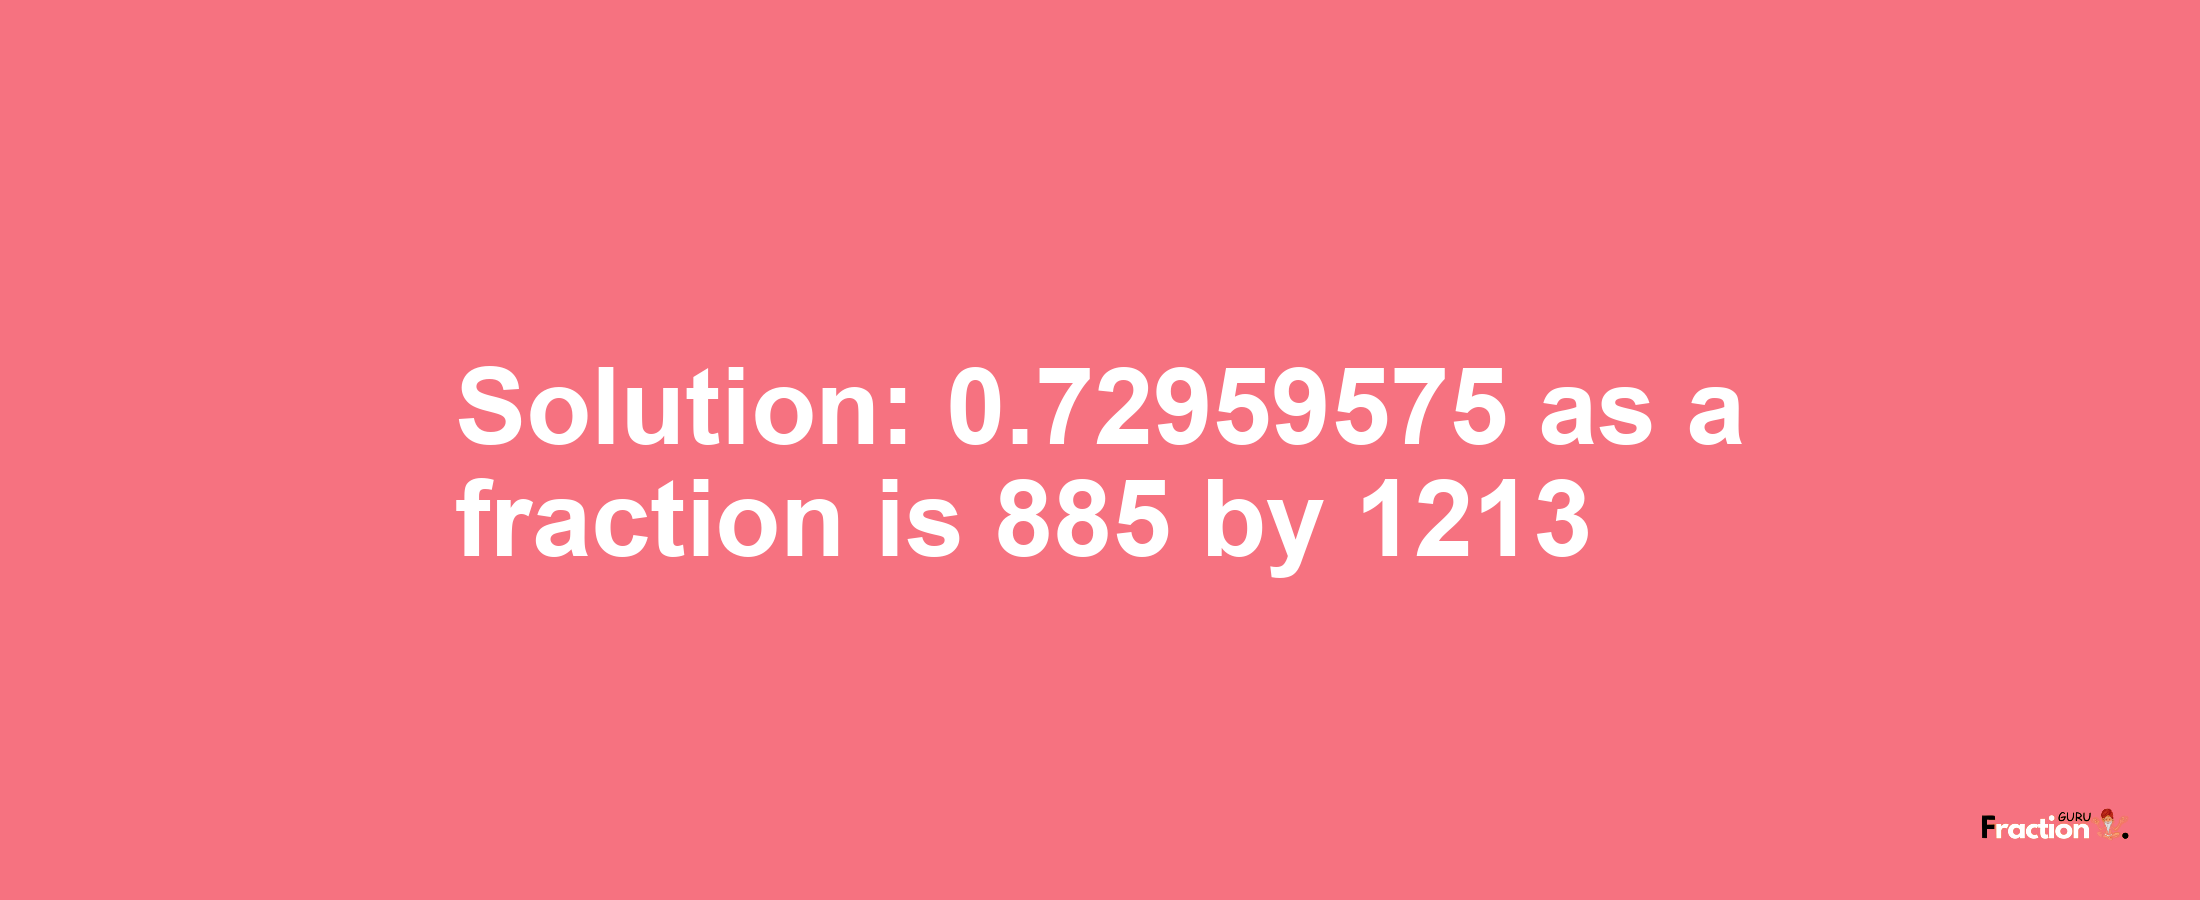 Solution:0.72959575 as a fraction is 885/1213